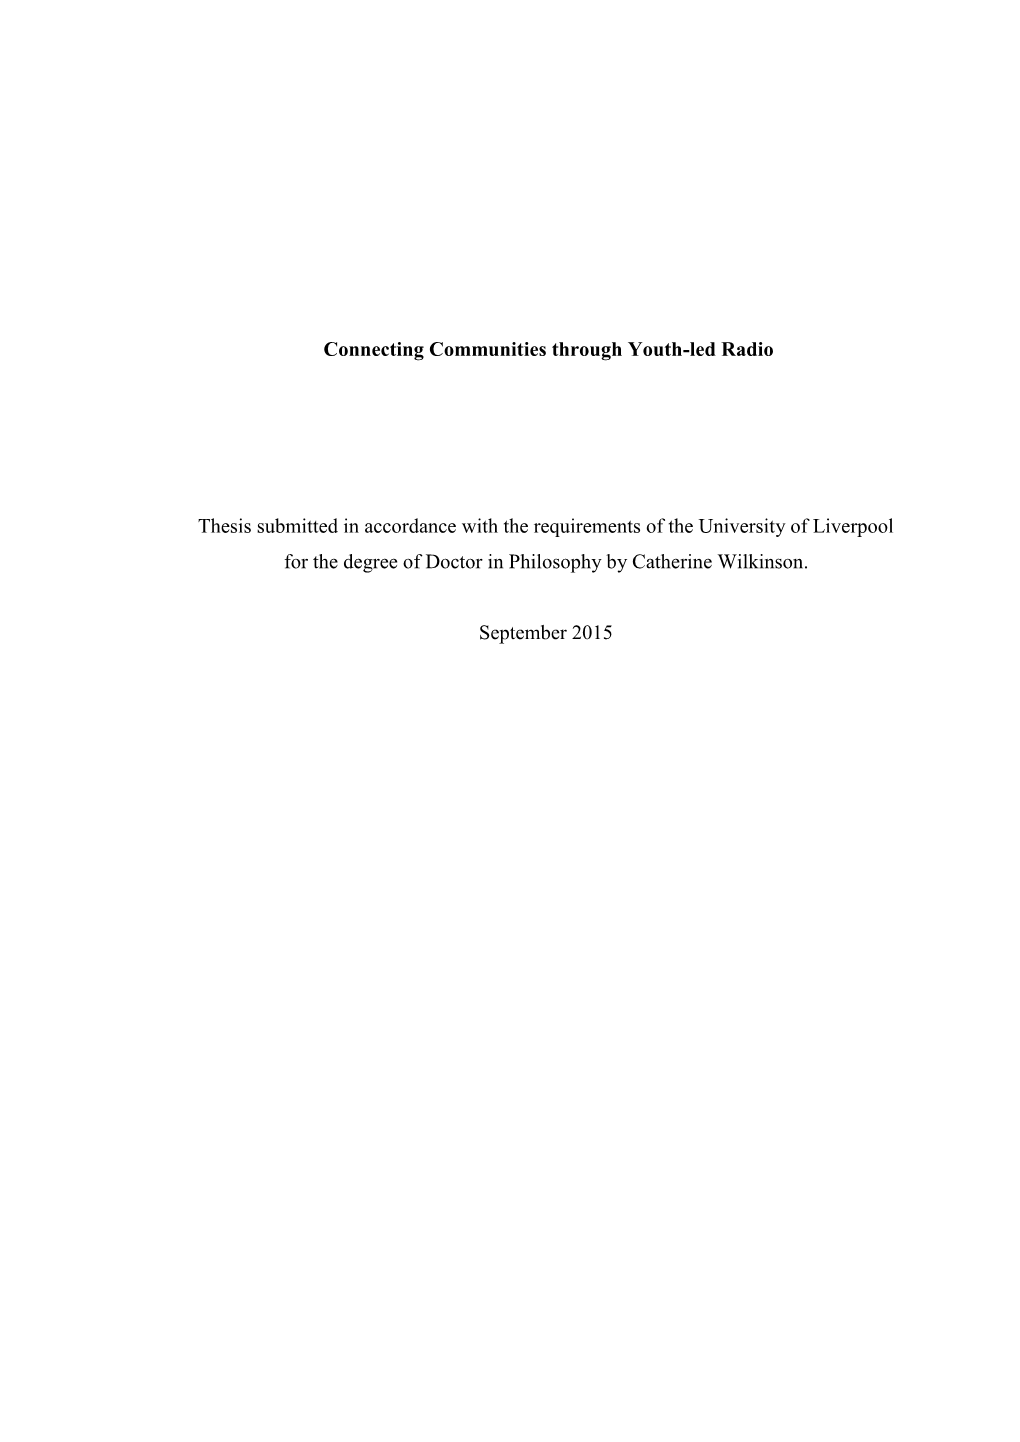 Connecting Communities Through Youth-Led Radio Thesis Submitted